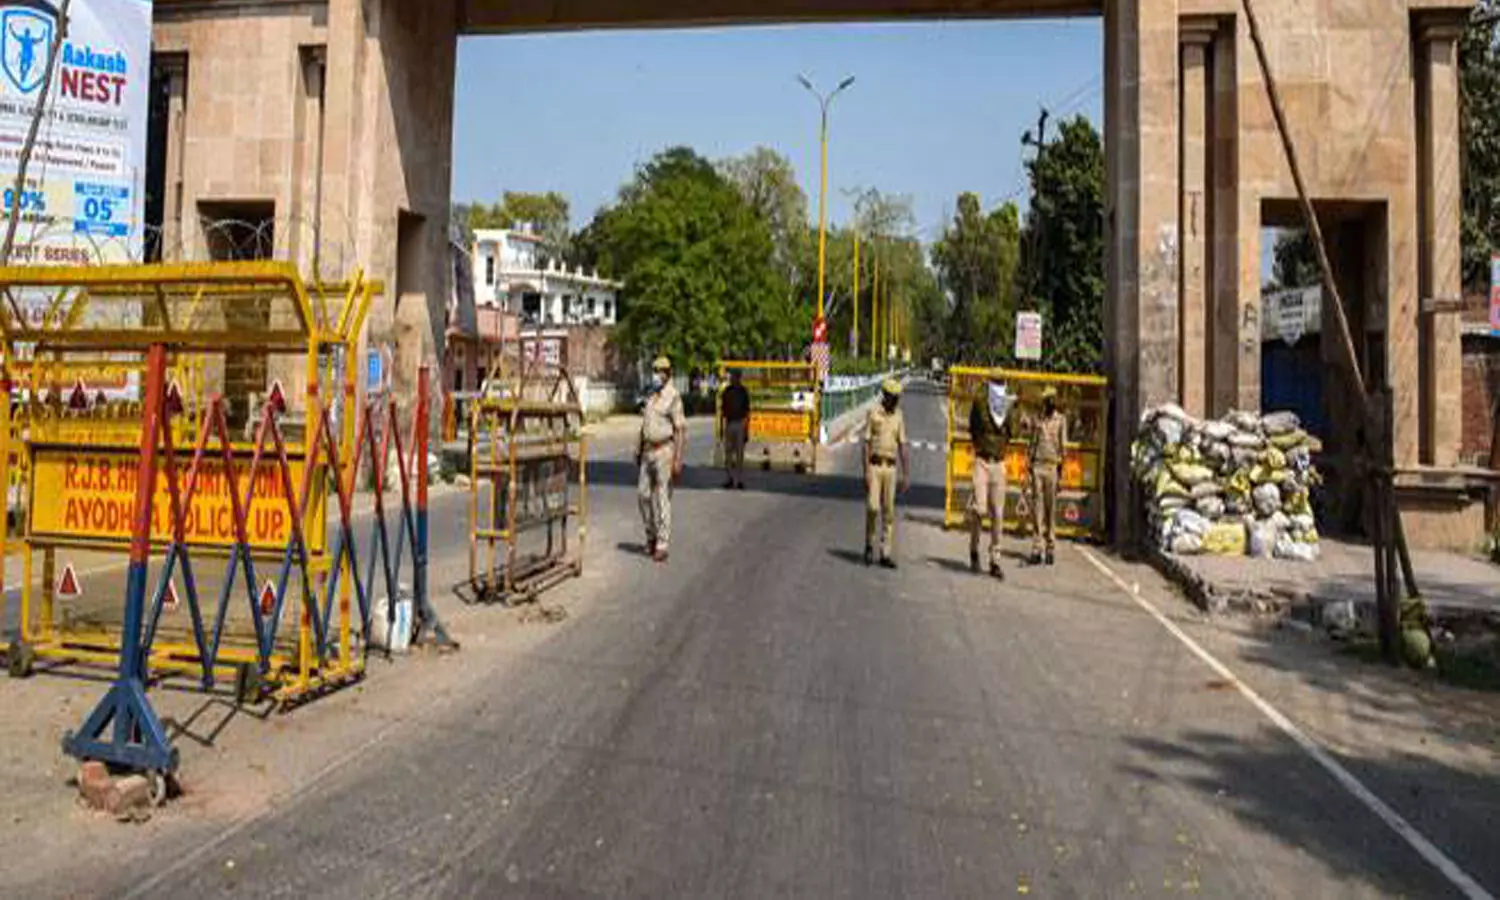 UP Govt extends Lockdown till May 6 amid spike in Covid cases; check all details here